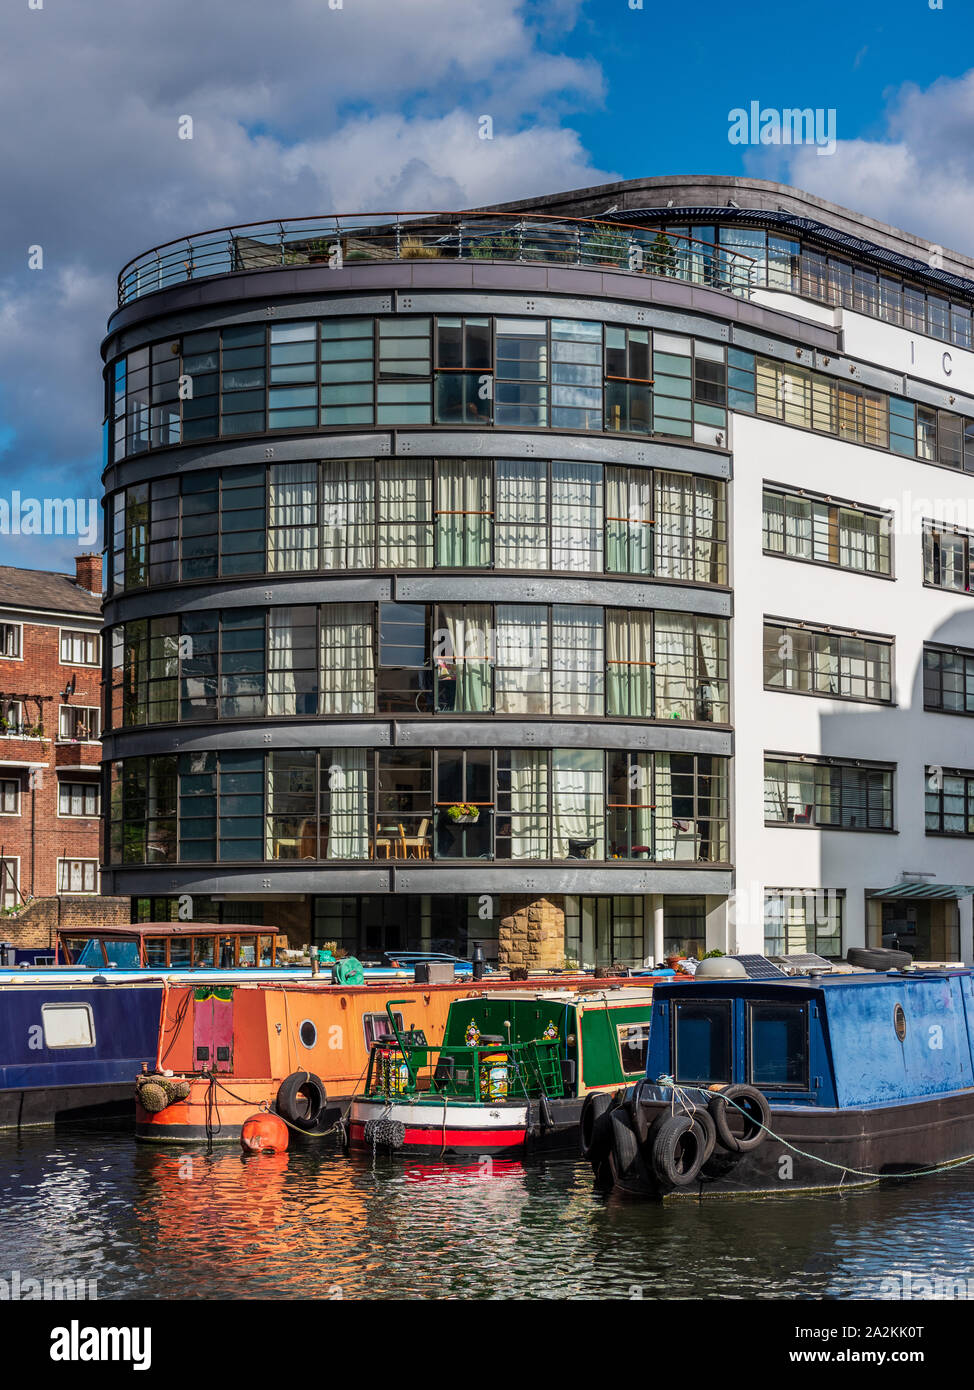 Canalside Living - Apartments and canal boats at Battlebridge Basin on London's Regents Canal. Stock Photo